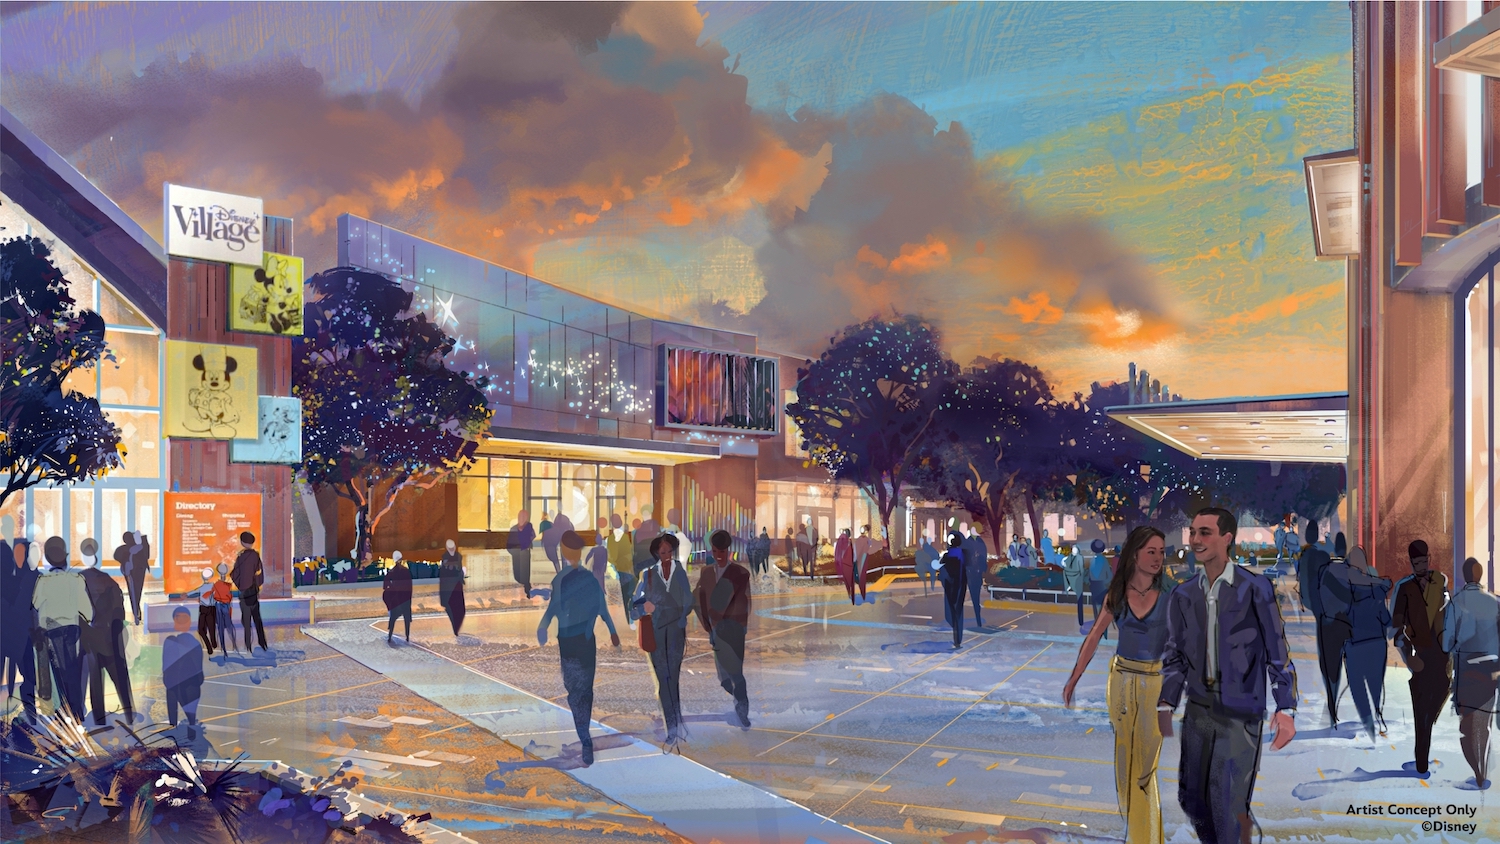 Imagineers share creative vision and look ahead to next steps of Disney Village multi-year transformation